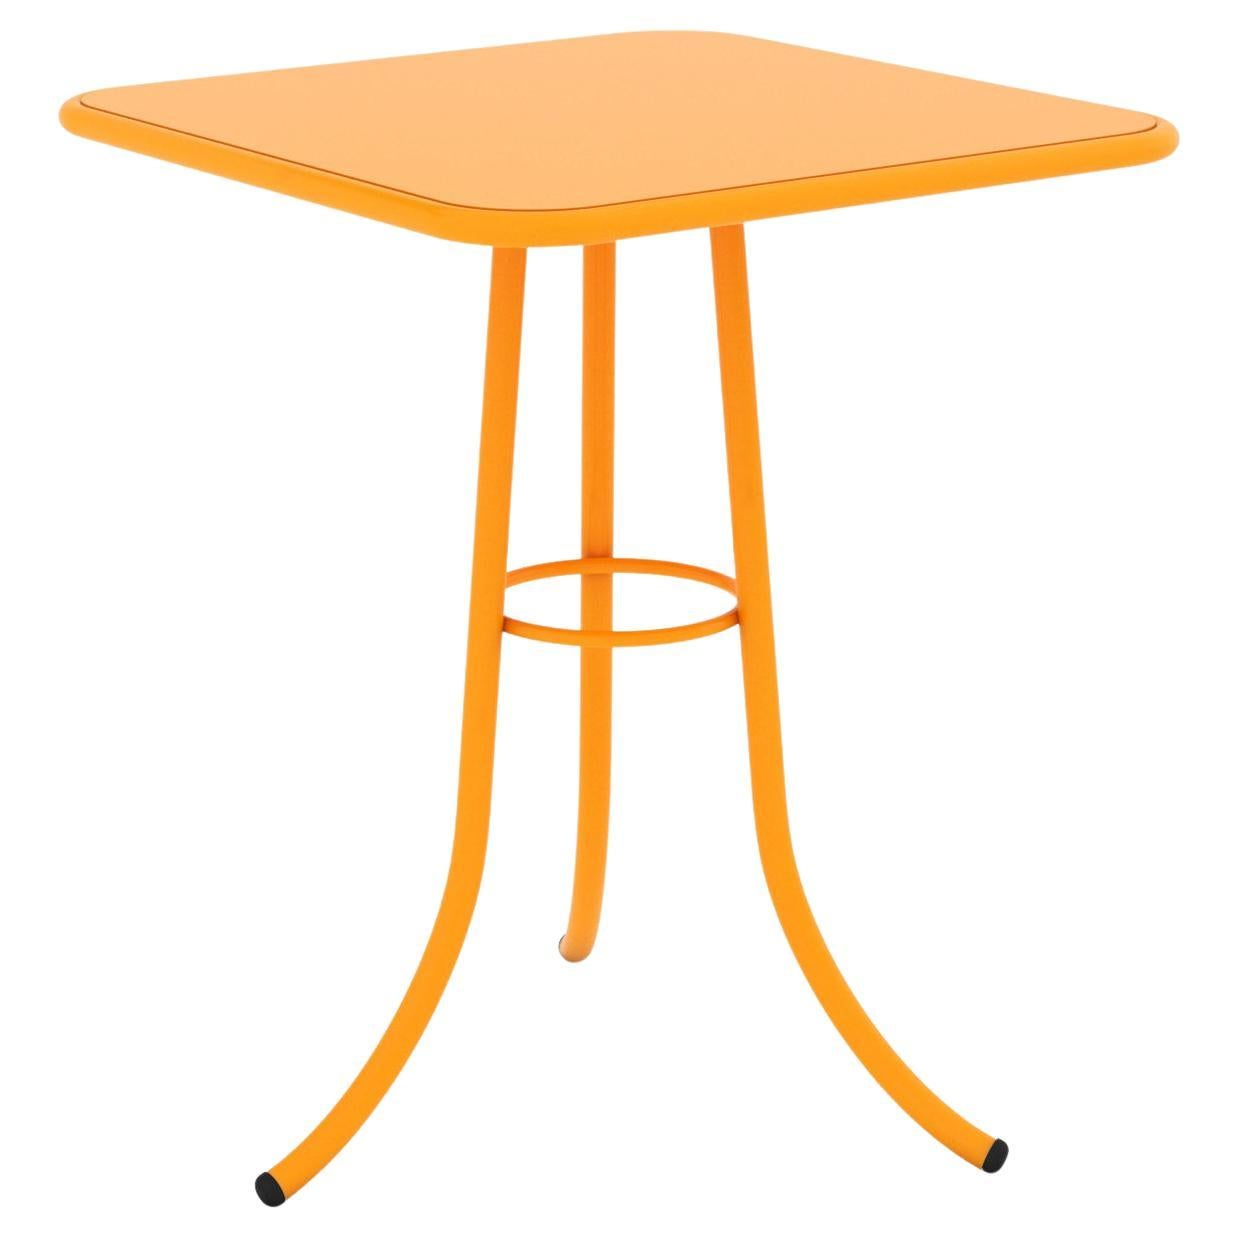 BICAtable 3 Modern Outdoor Steel Three-legged Table in Melon Yellow 60x60cm For Sale